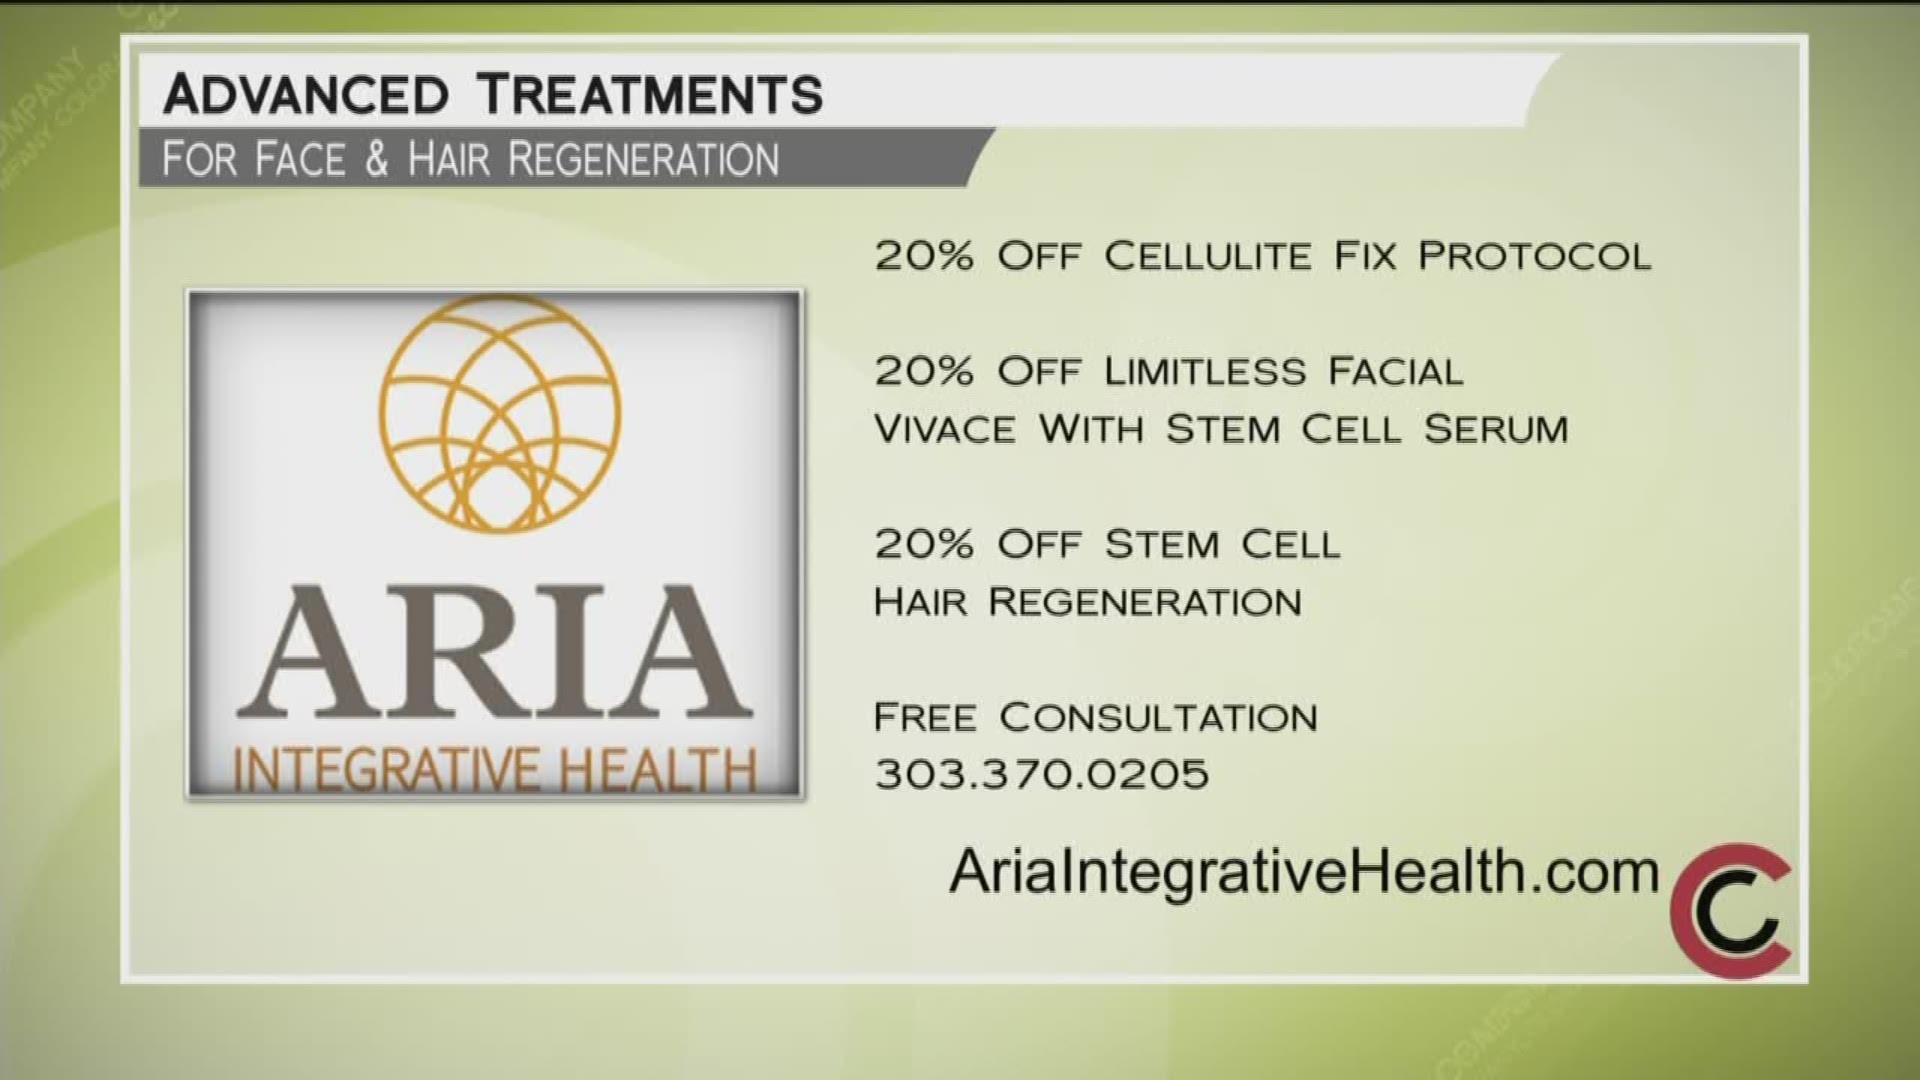 Call 303.370.0205 to find out about today’s specials and book your appointment. Learn more at AriaIntegrativeHealth.com.